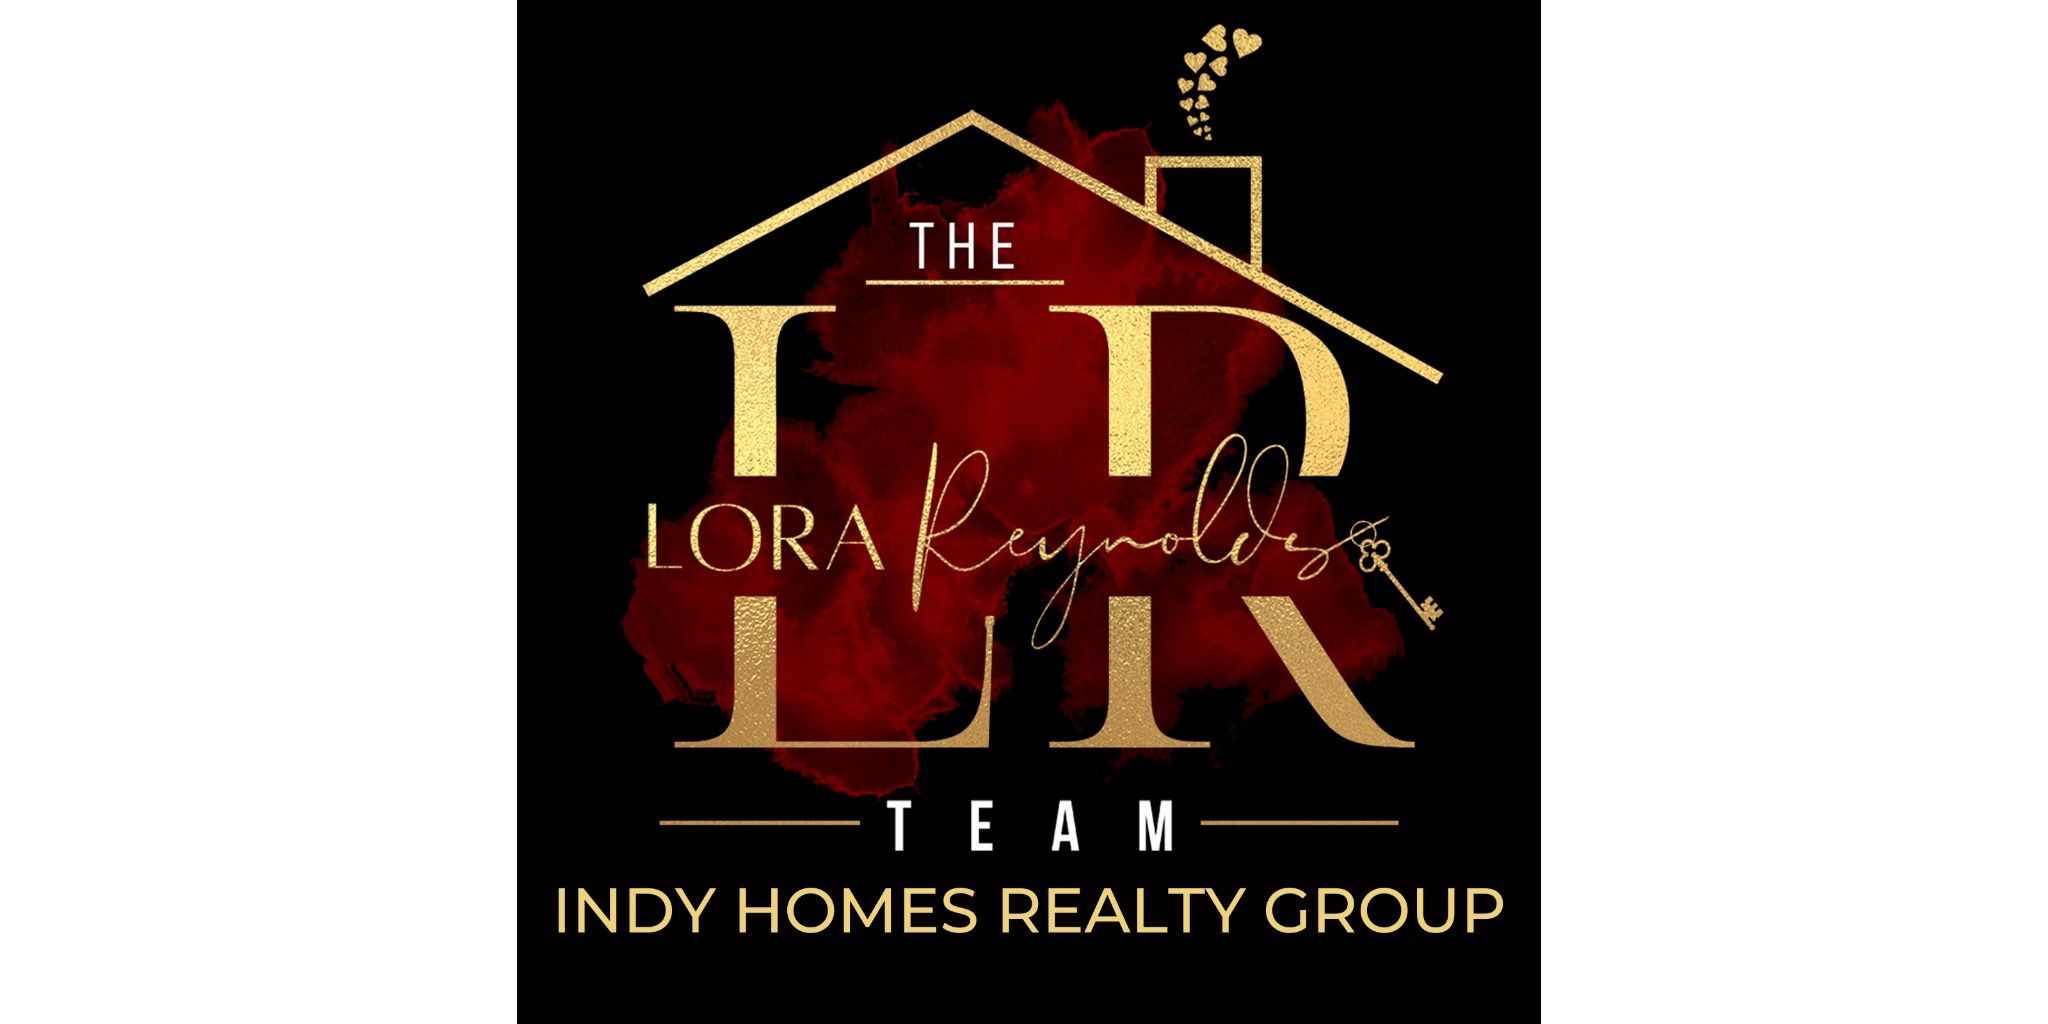 Indy Homes Realty Group